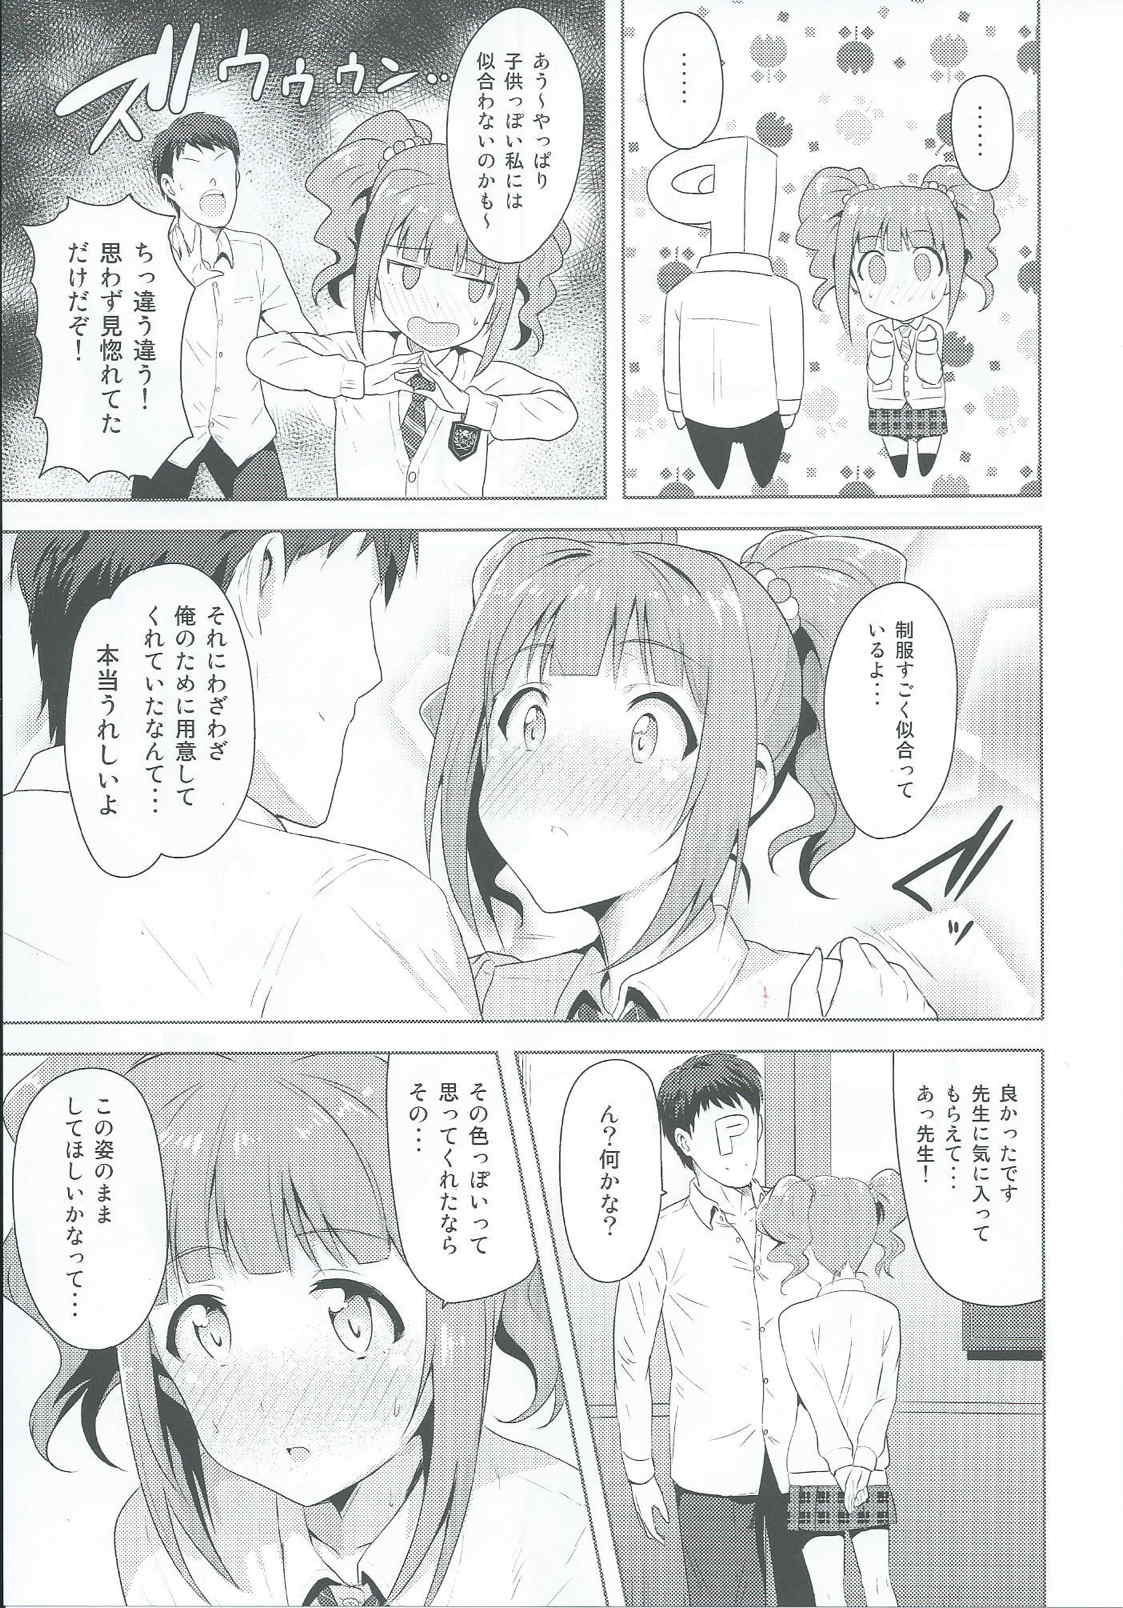 (iDOLPROJECT 13) [PLANT (Tsurui)] Yayoi to Issho 2 (THE IDOLM@STER) page 22 full